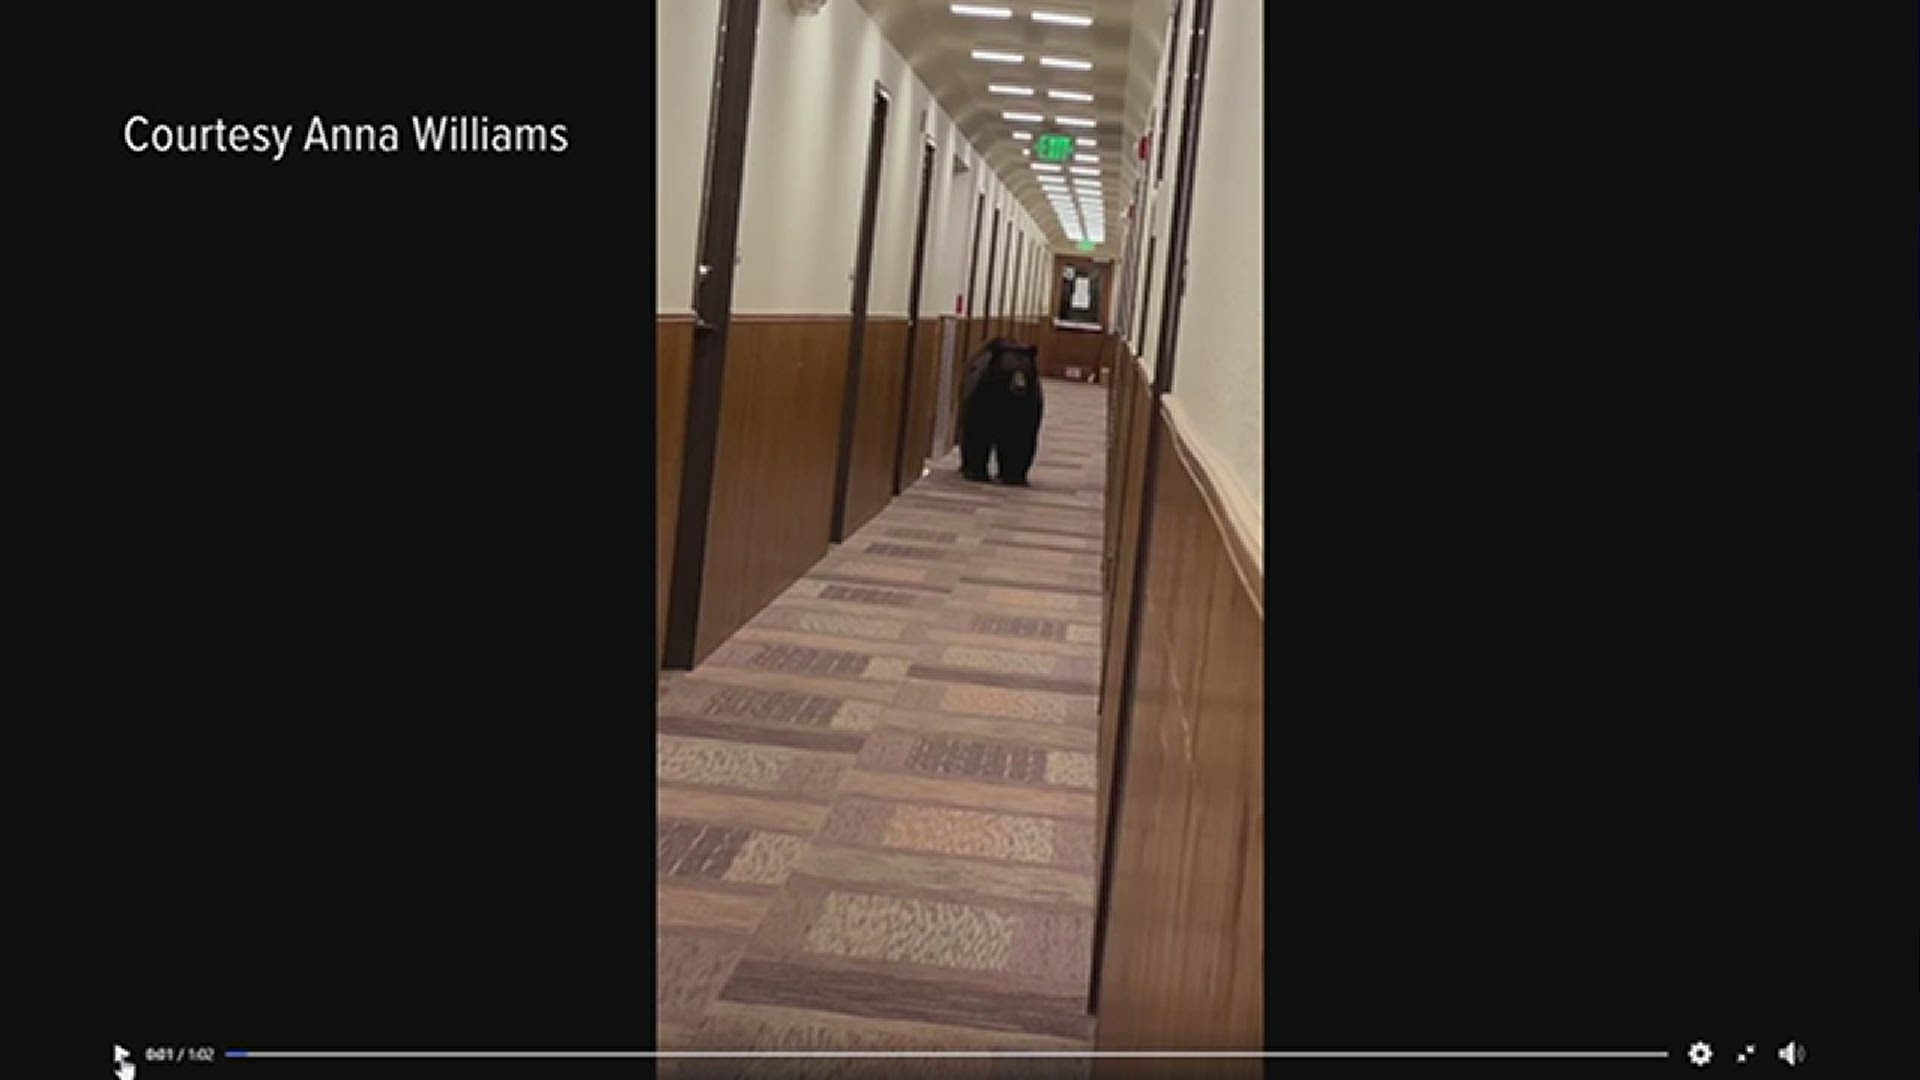 The bear was spotted wandering through a hallway at a lodge at the YMCA of the Rockies in October 2020.